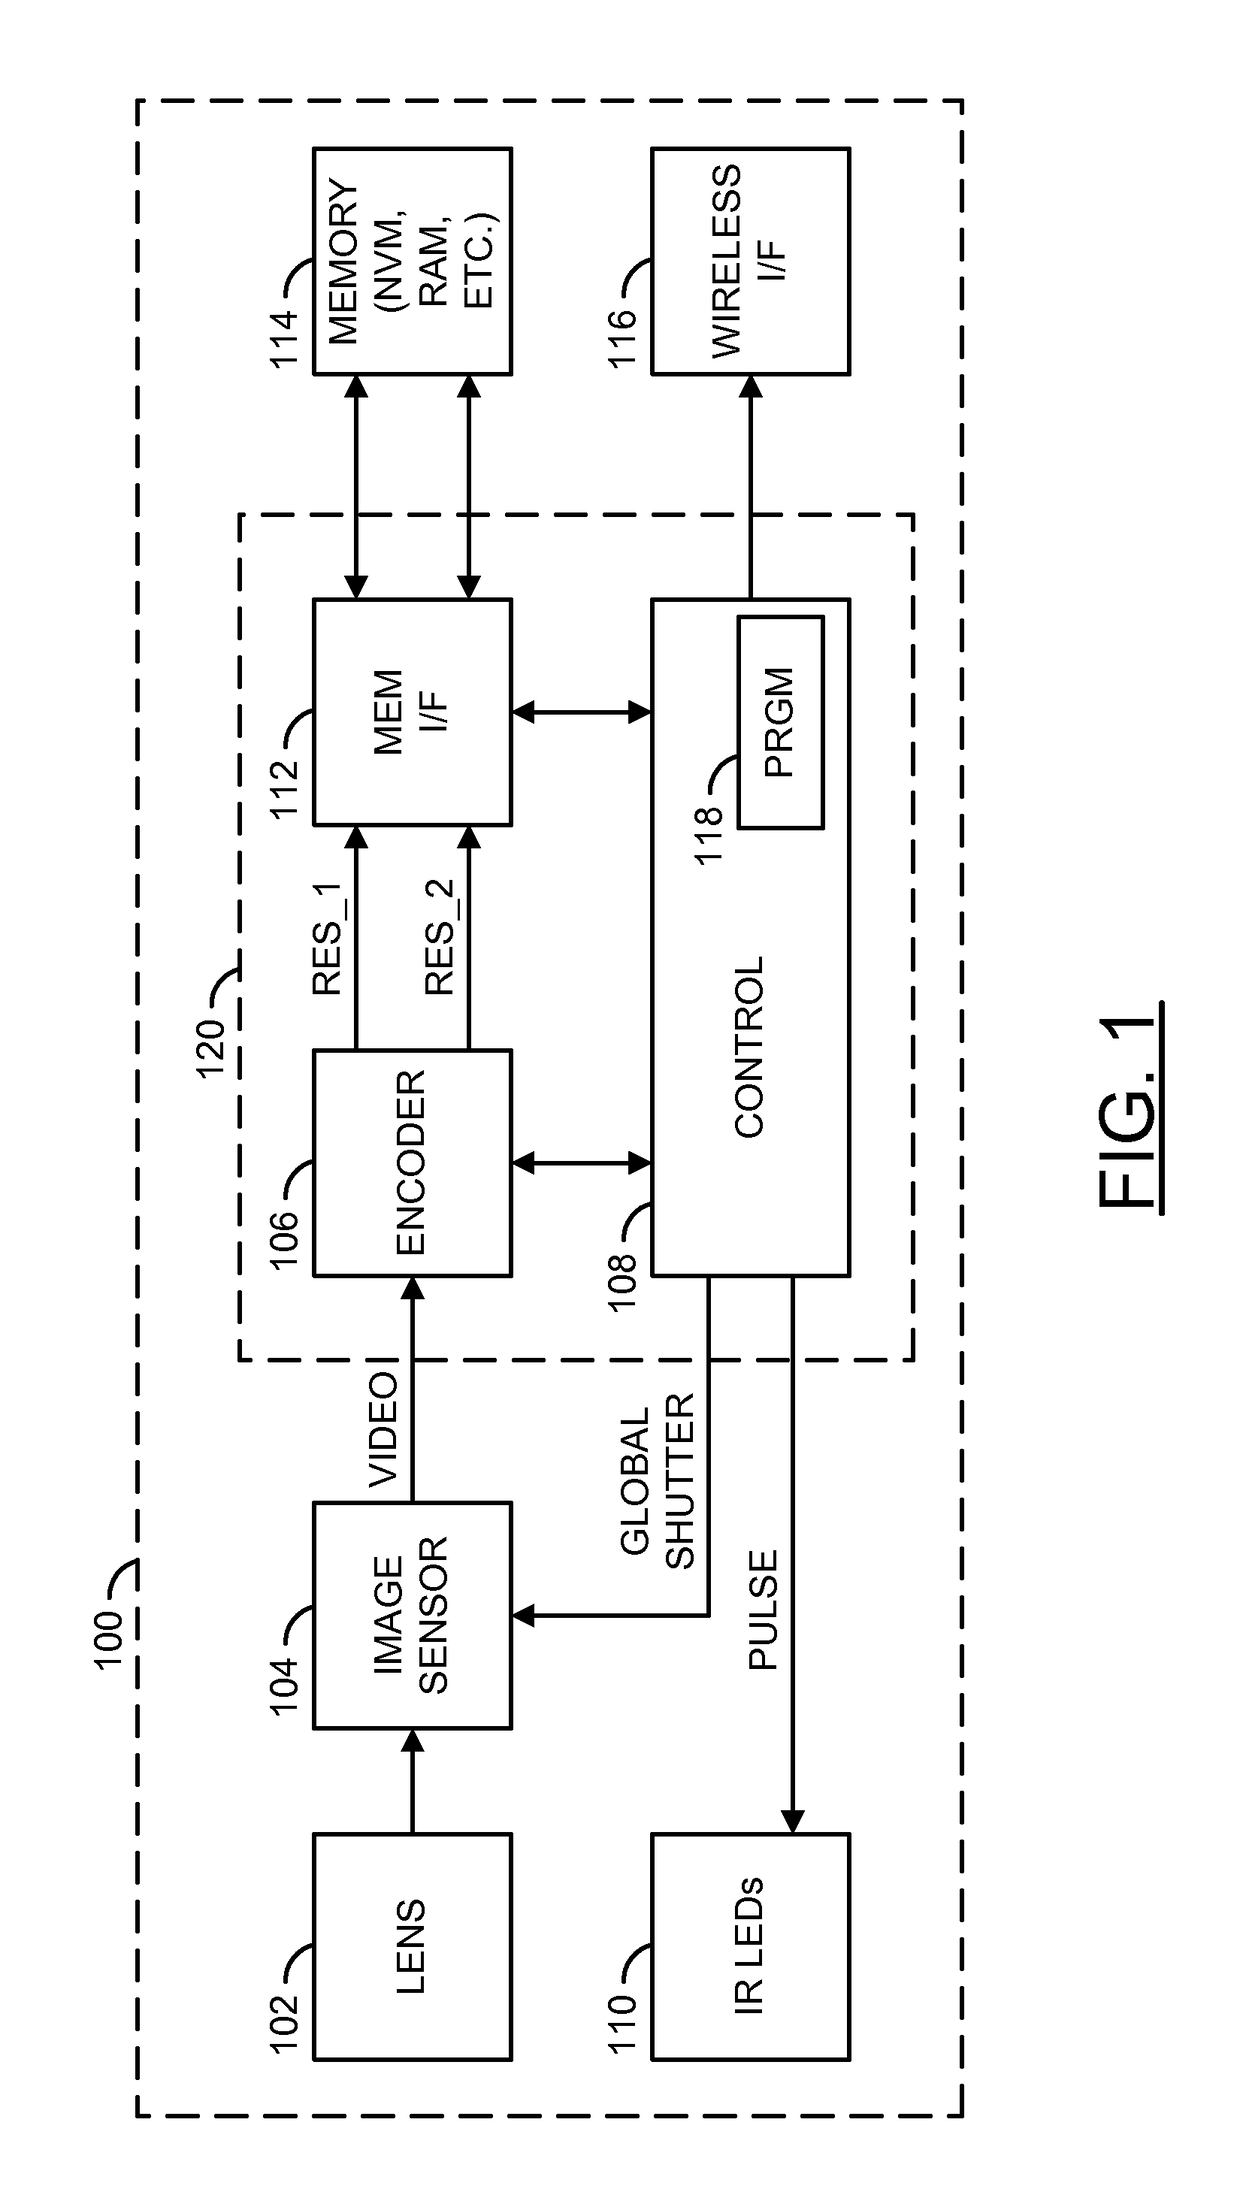 Night vision device with periodic infrared illumination and global shutter CMOS sensor